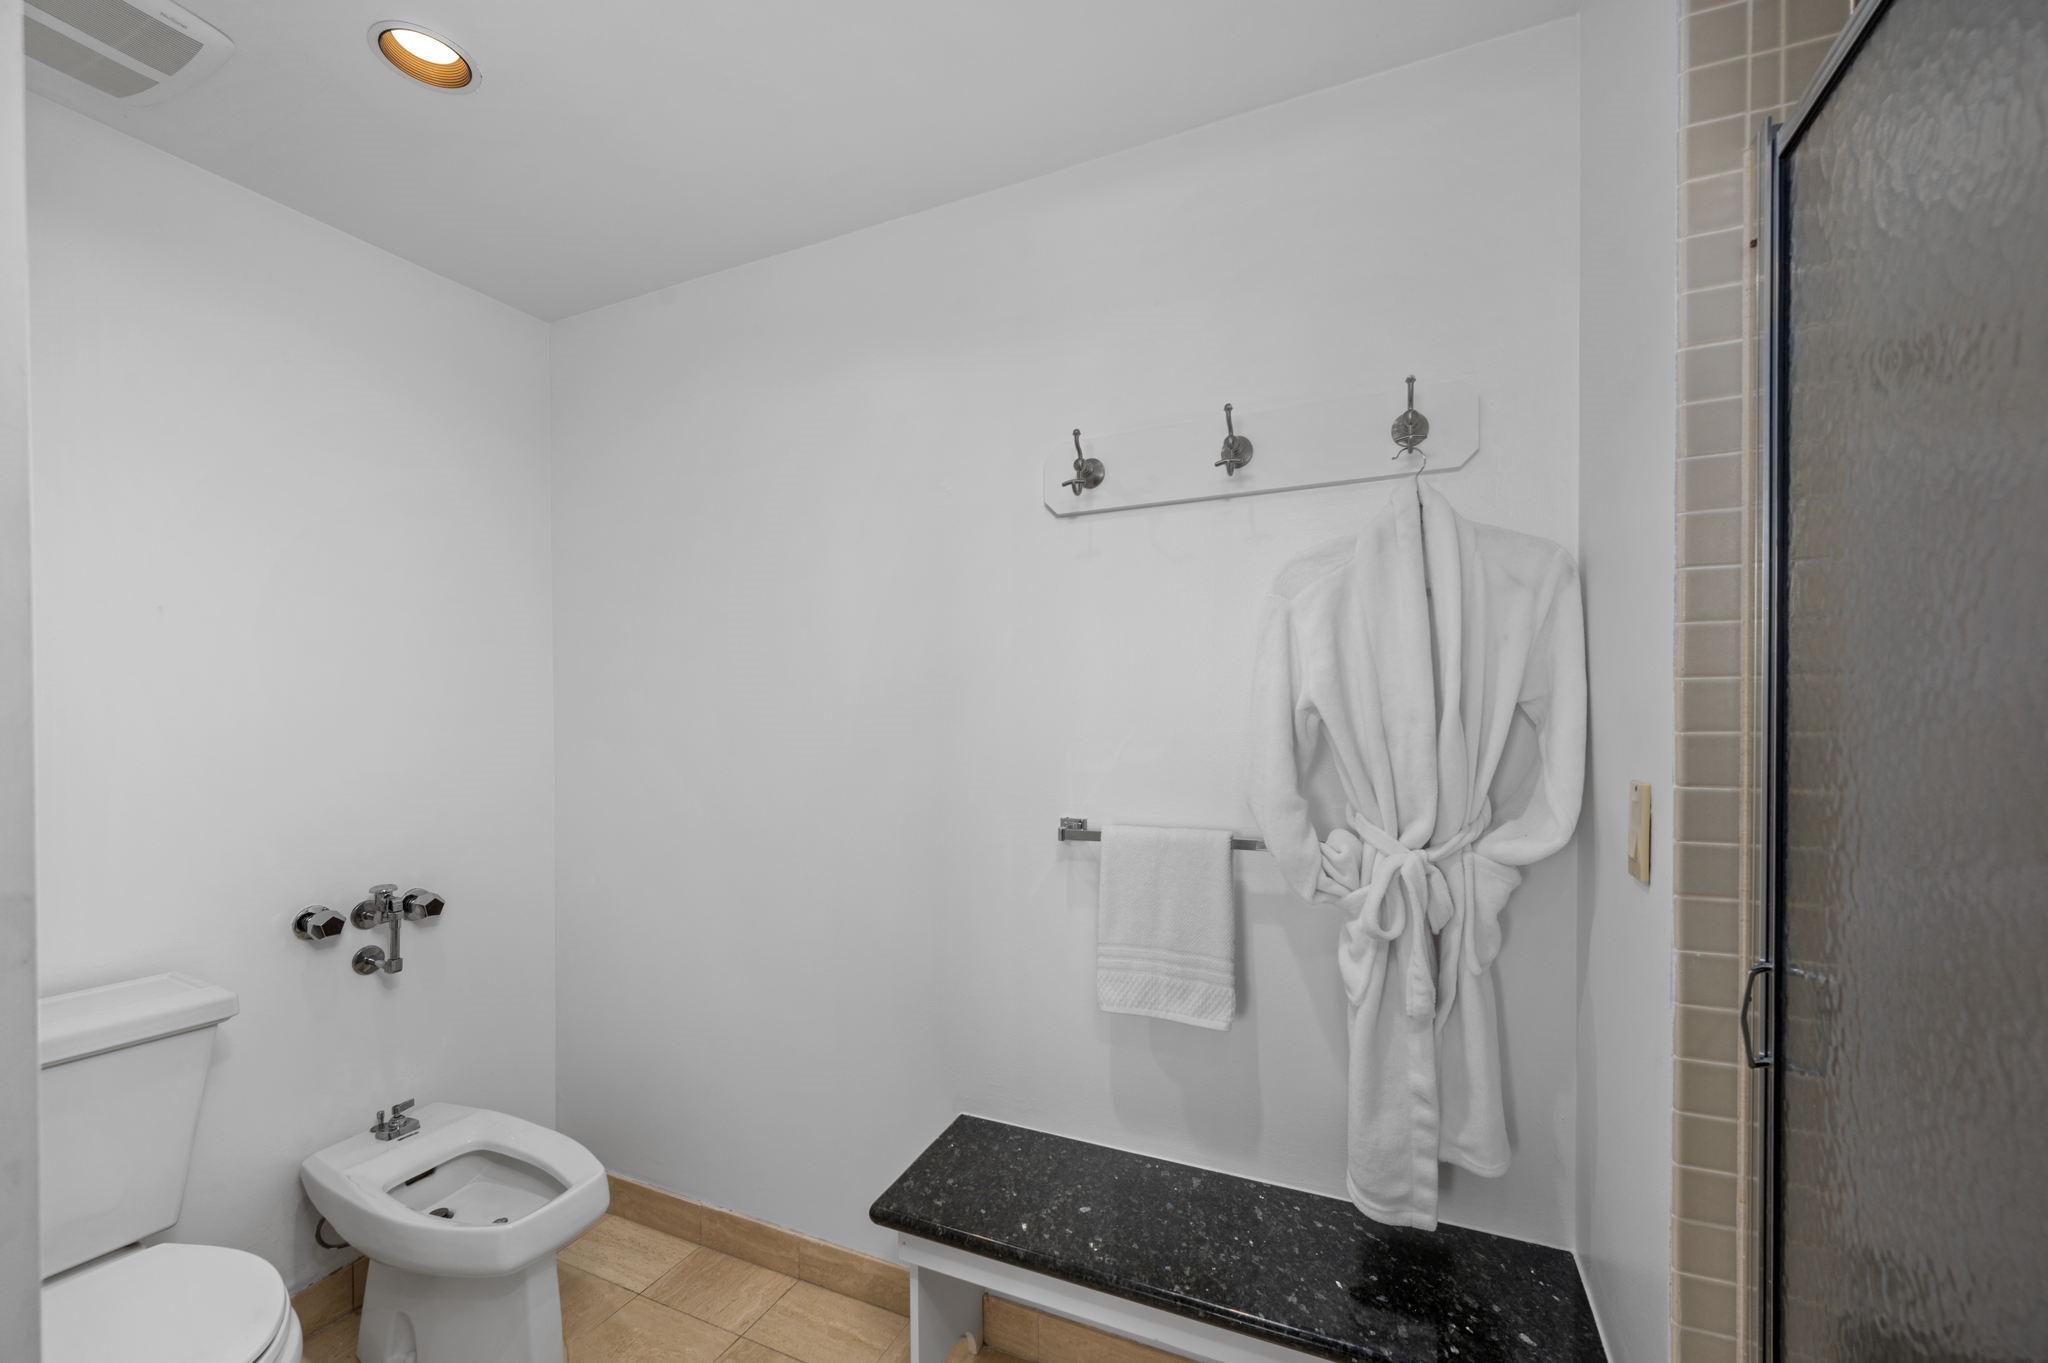 Primary bath features a walk-in shower, as well as a bidet in addition to the commode.